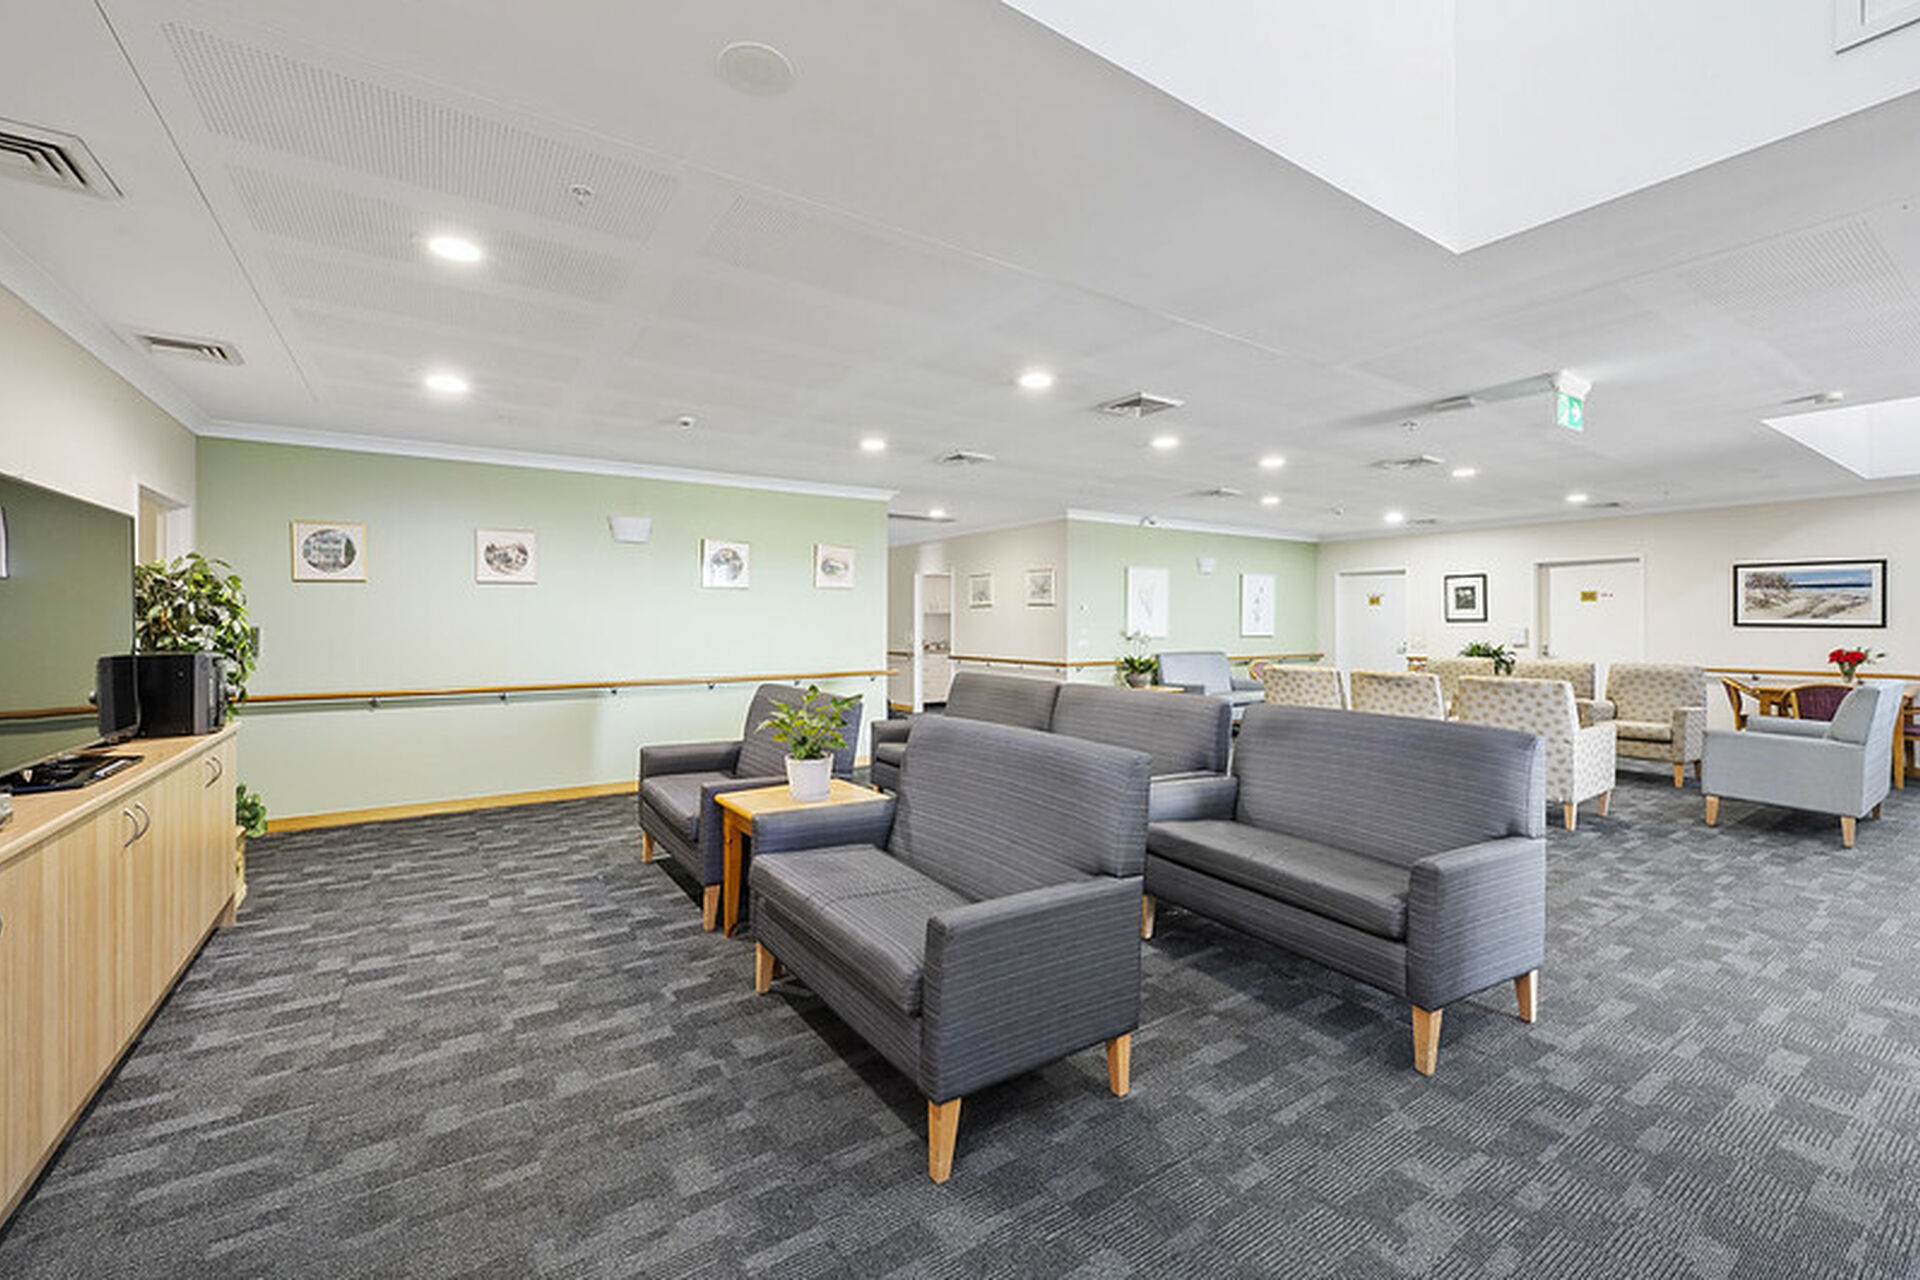 communal television area lounge room for aged care residents to socialise at baptistcare blue hills manor residential aged care home in prestons nsw